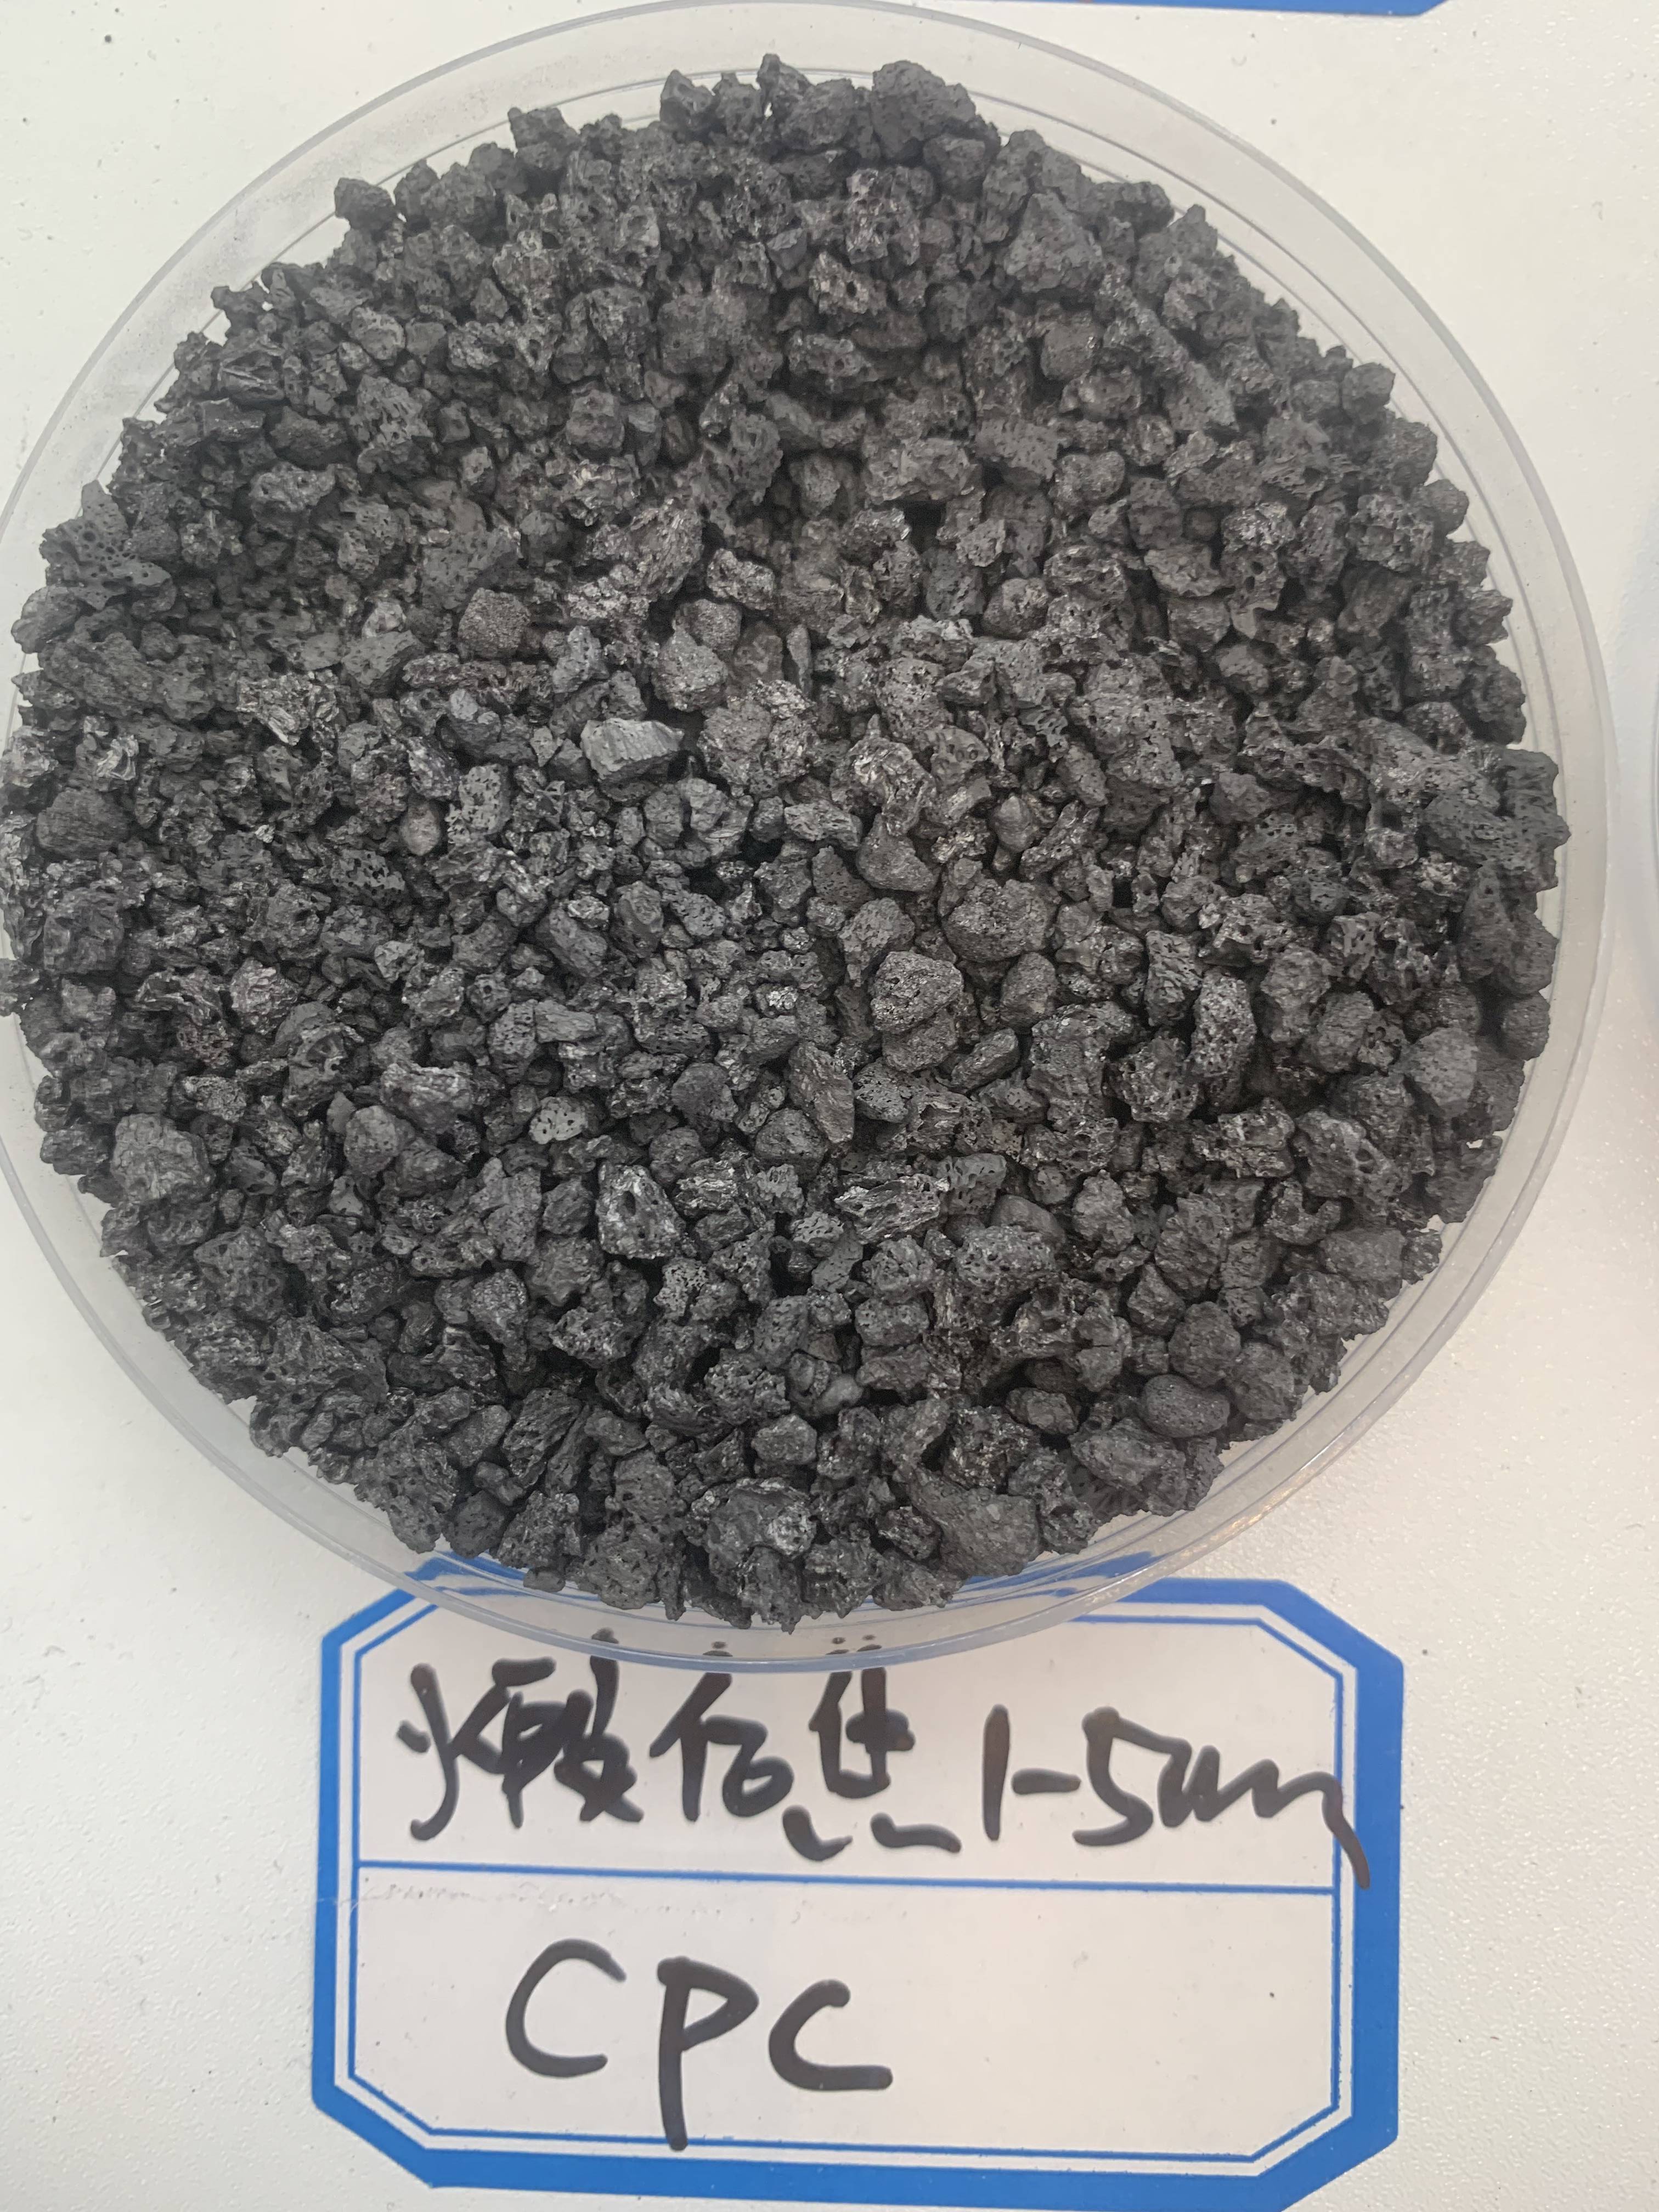 The difference between graphitized petroleum coke and calcined petroleum coke